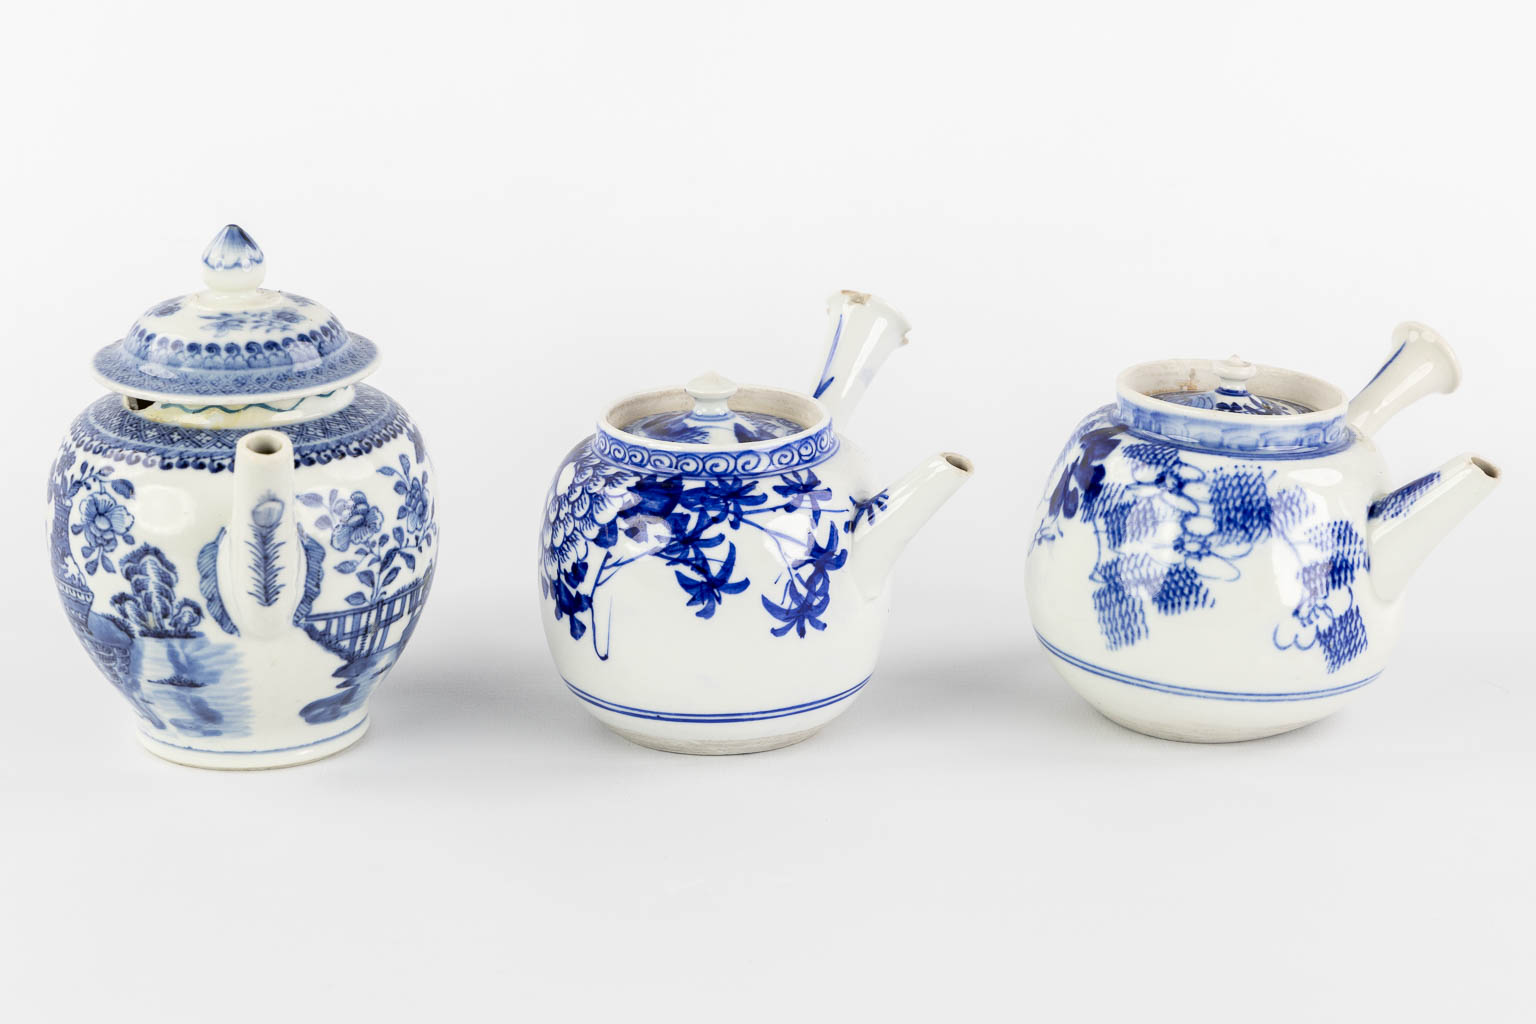 Three Chinese and Japanese teapots, blue-white decor. (W:20 x H:14 cm) - Image 6 of 17